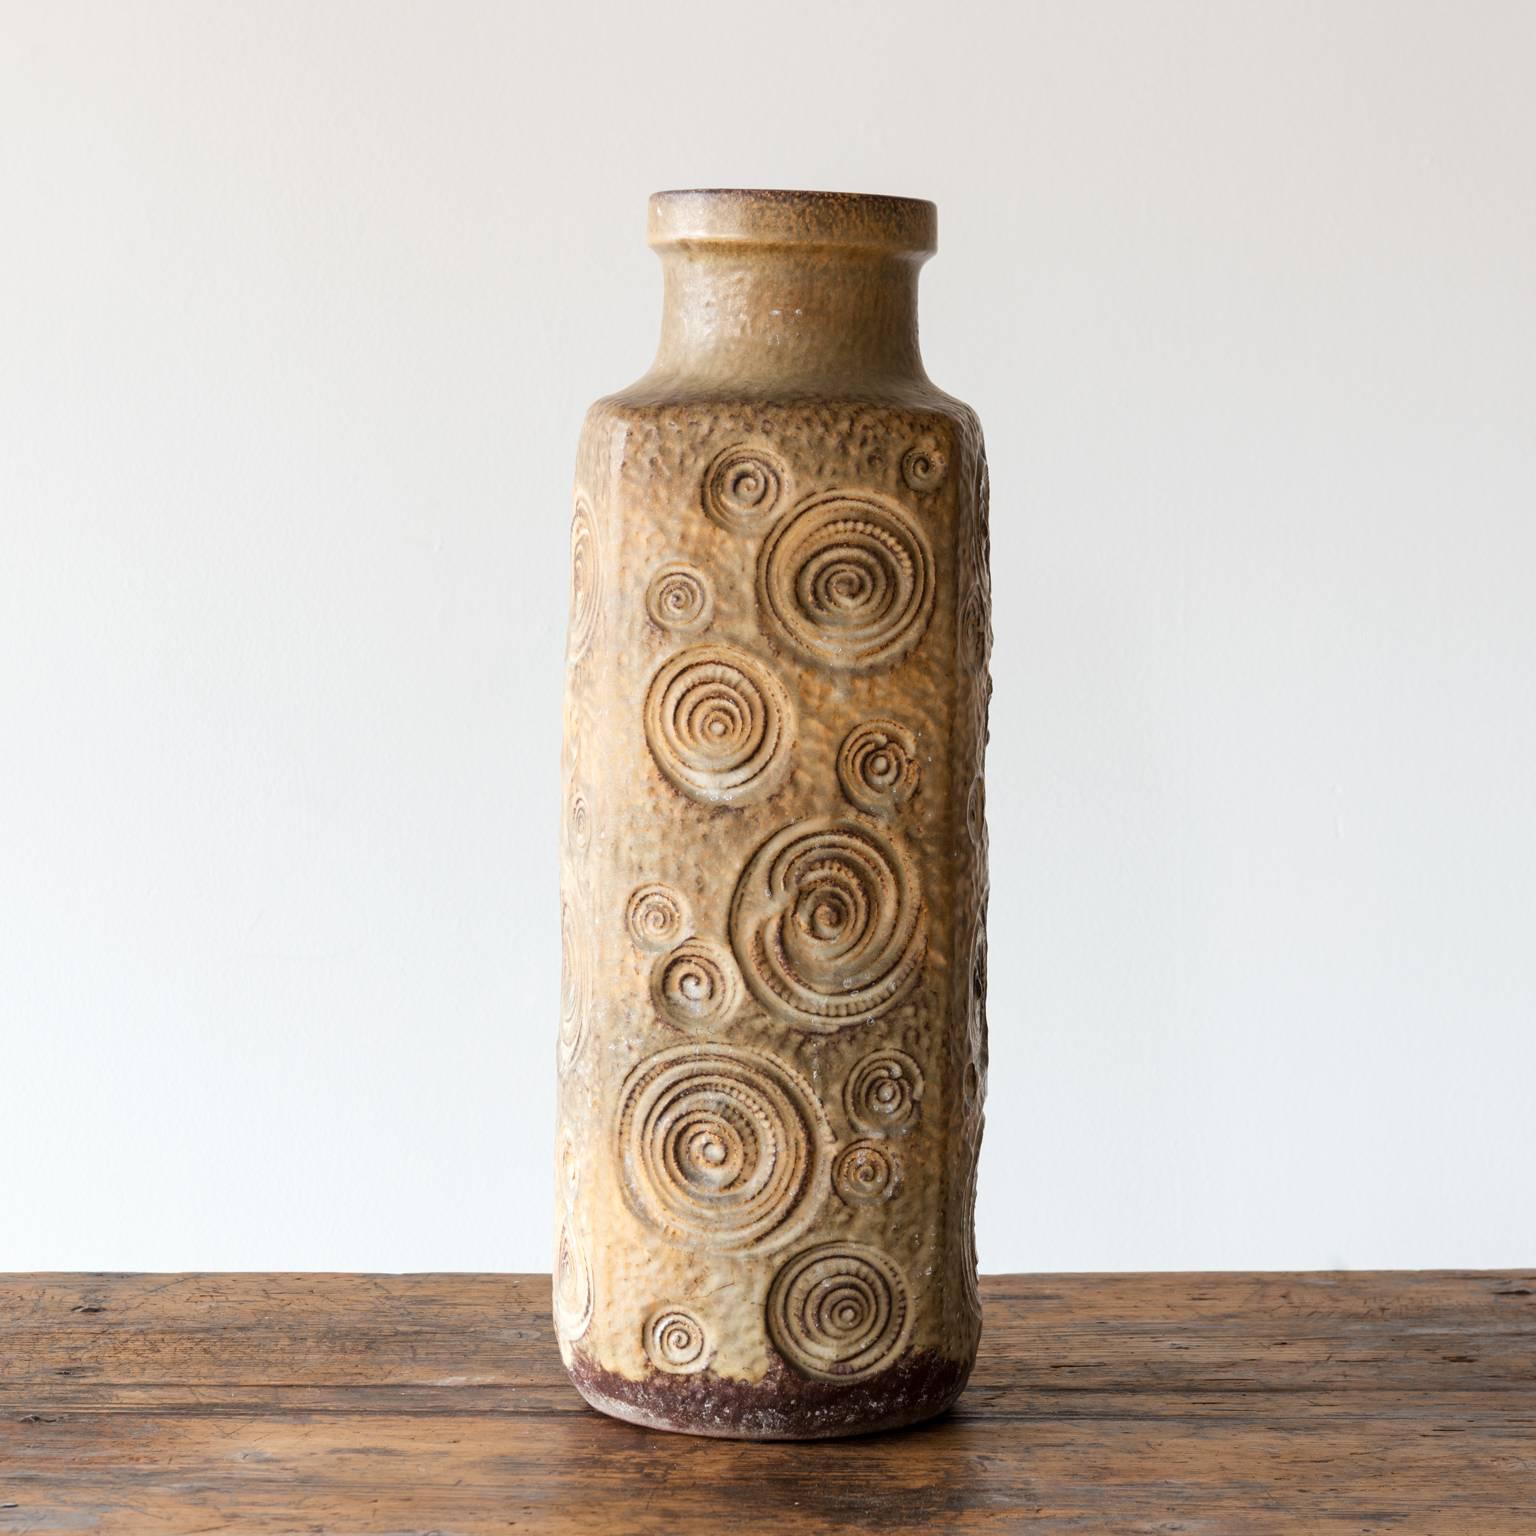 A striking, tall, modernist, ceramic vase from France in a warm glaze with a spiral pattern, France, mid-20th century.